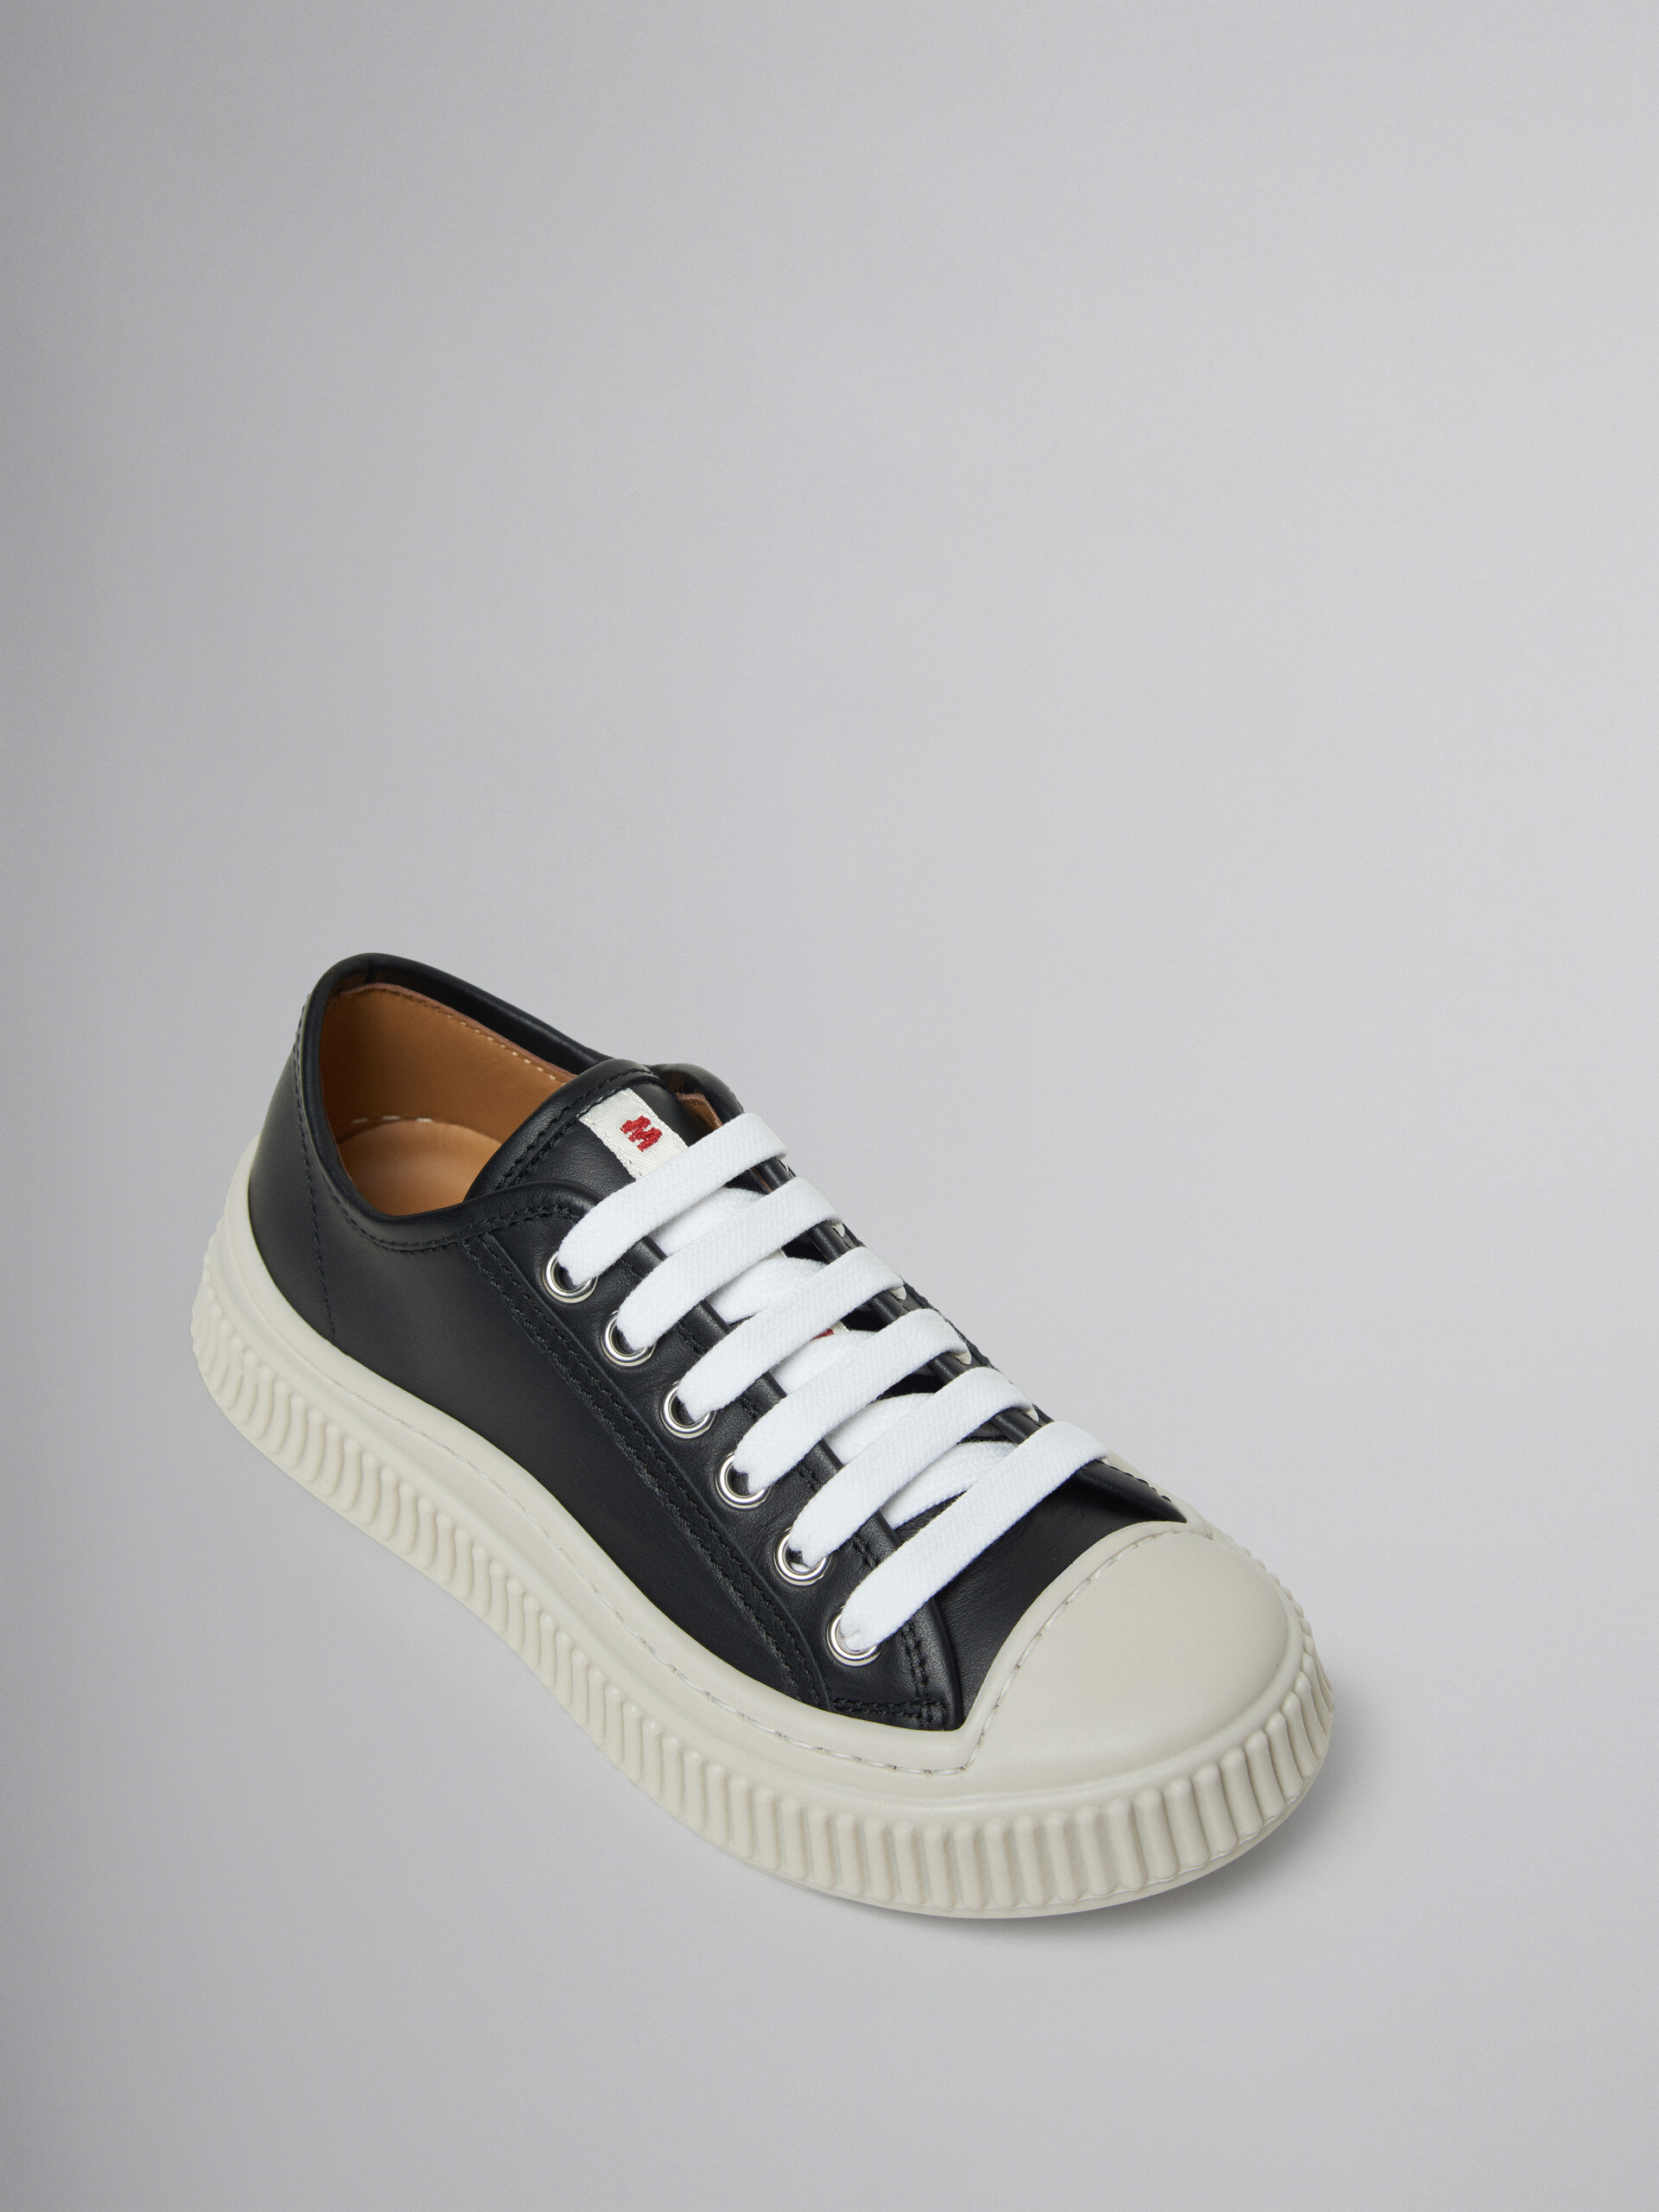 Low top lether Pablo sneaker - Sneakers - Image 4